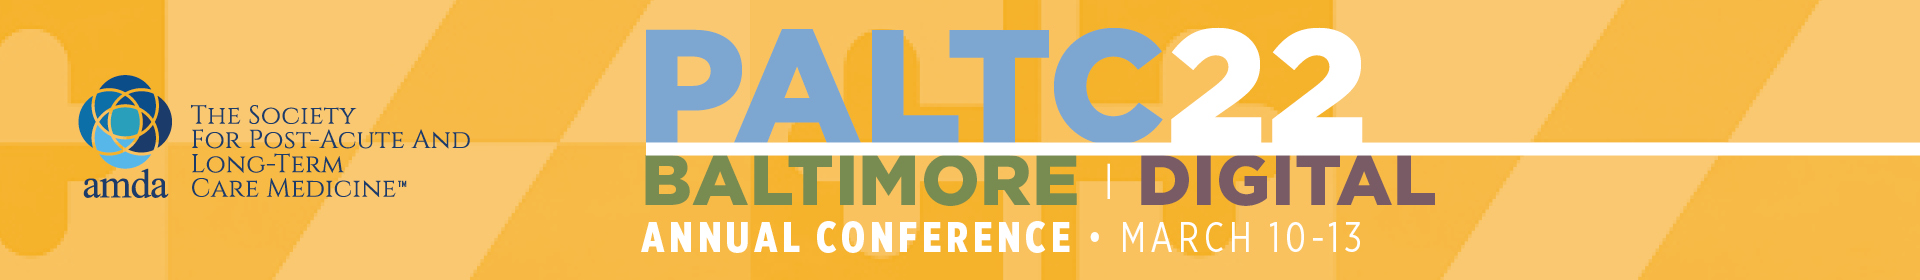 PALTC22 AMDA Annual Conference Event Banner